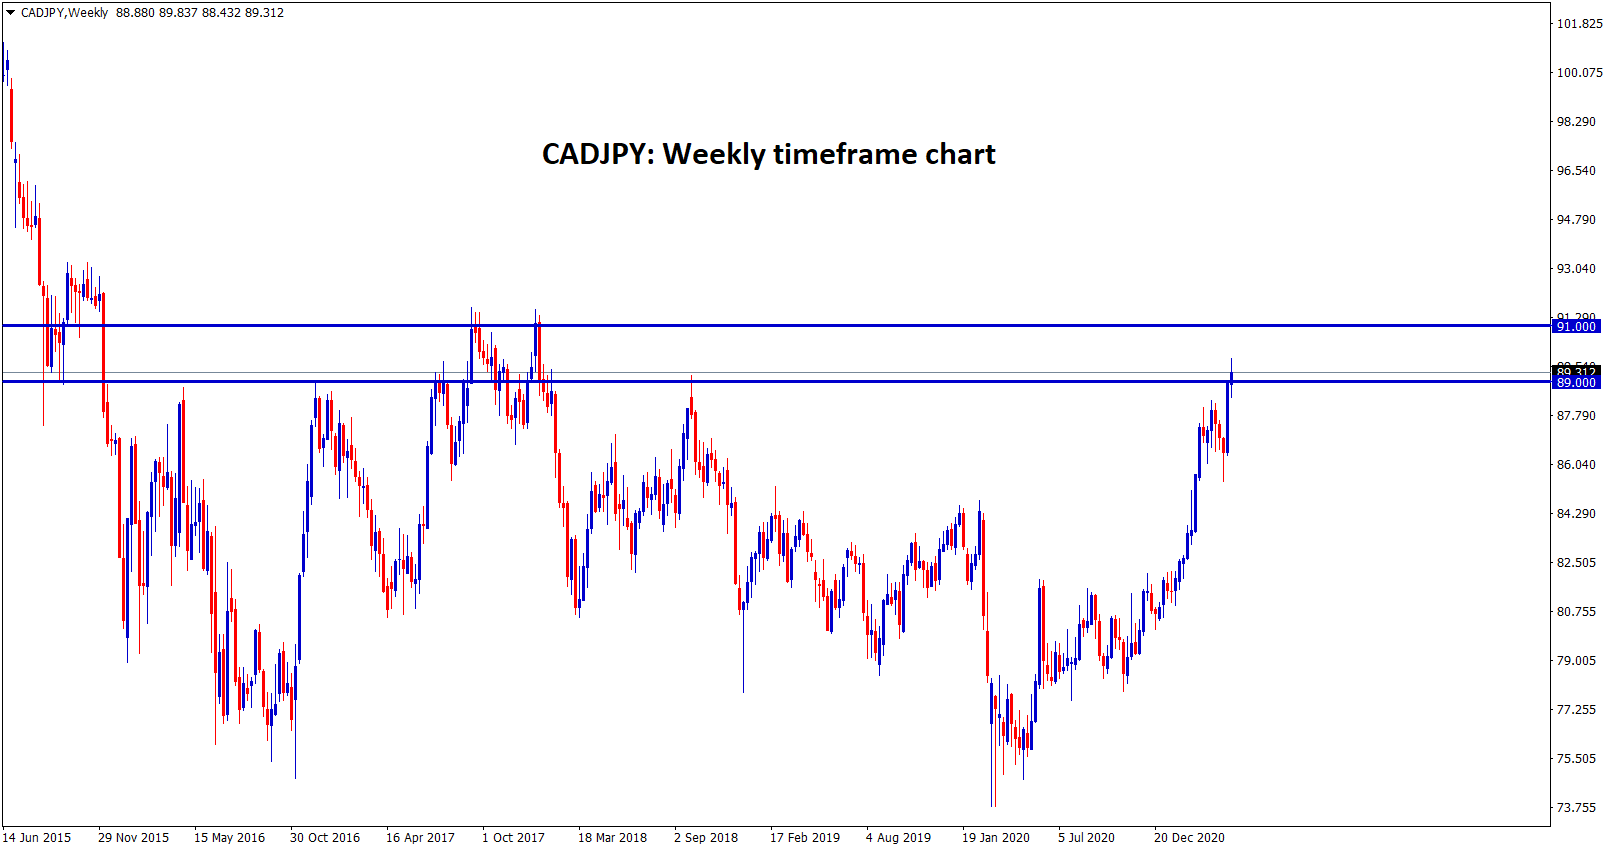 CADJPY at the resistance zone between 89 and 90 1